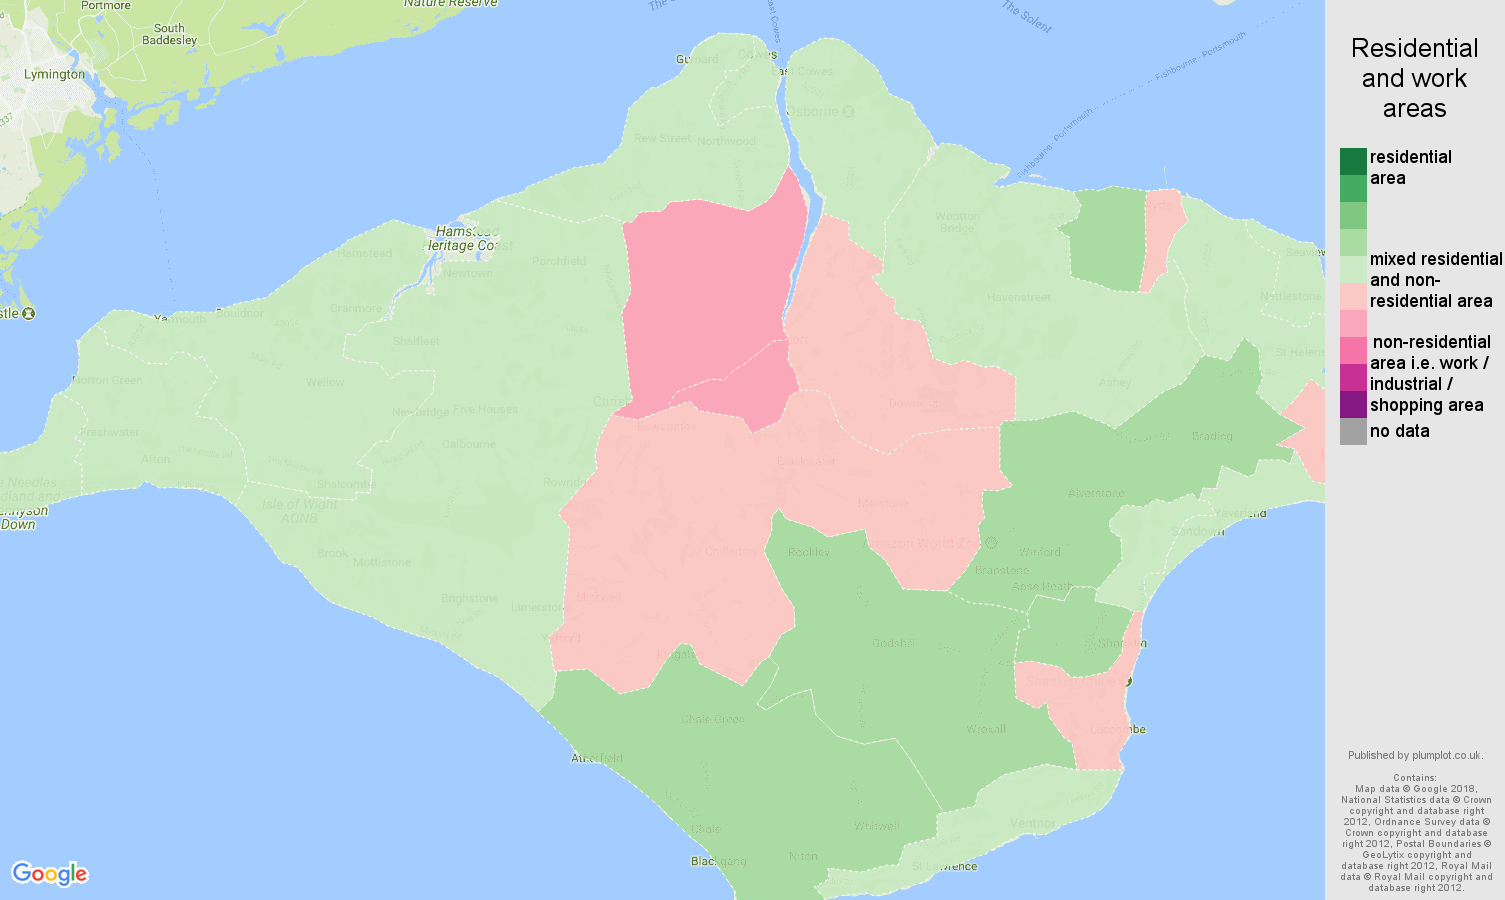 Isle of Wight residential areas map